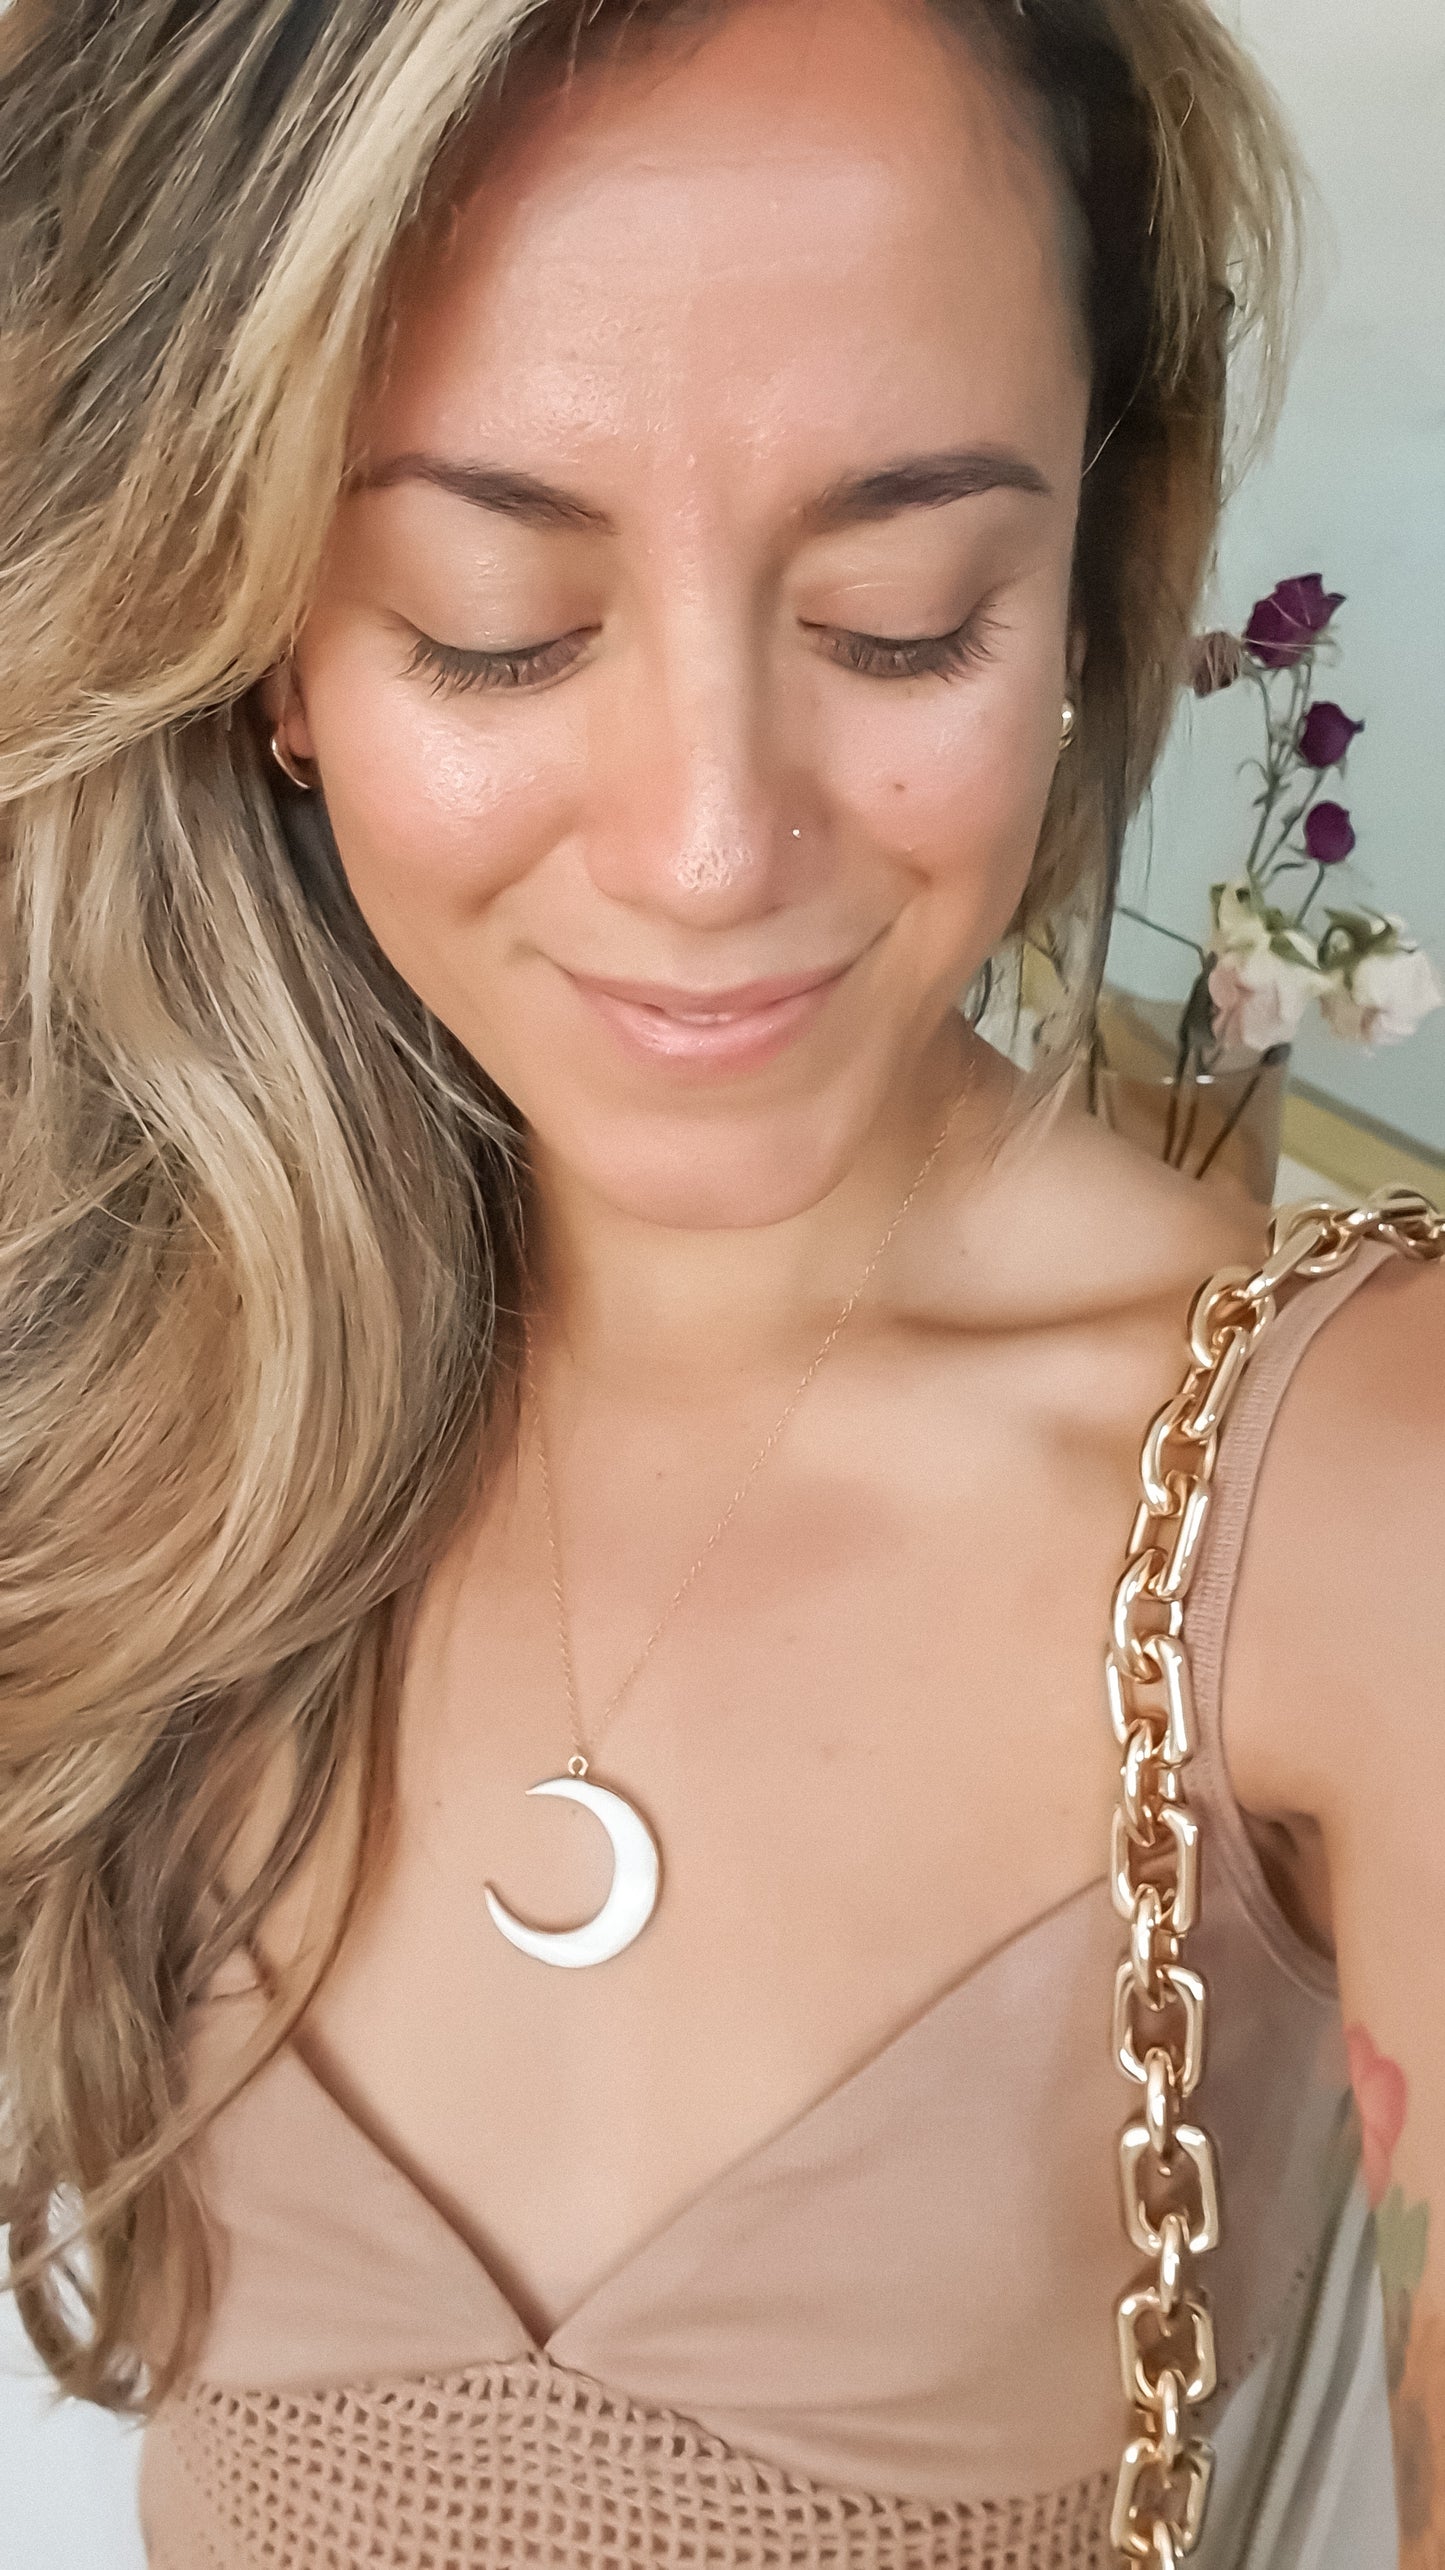 Follow the Moon Necklace